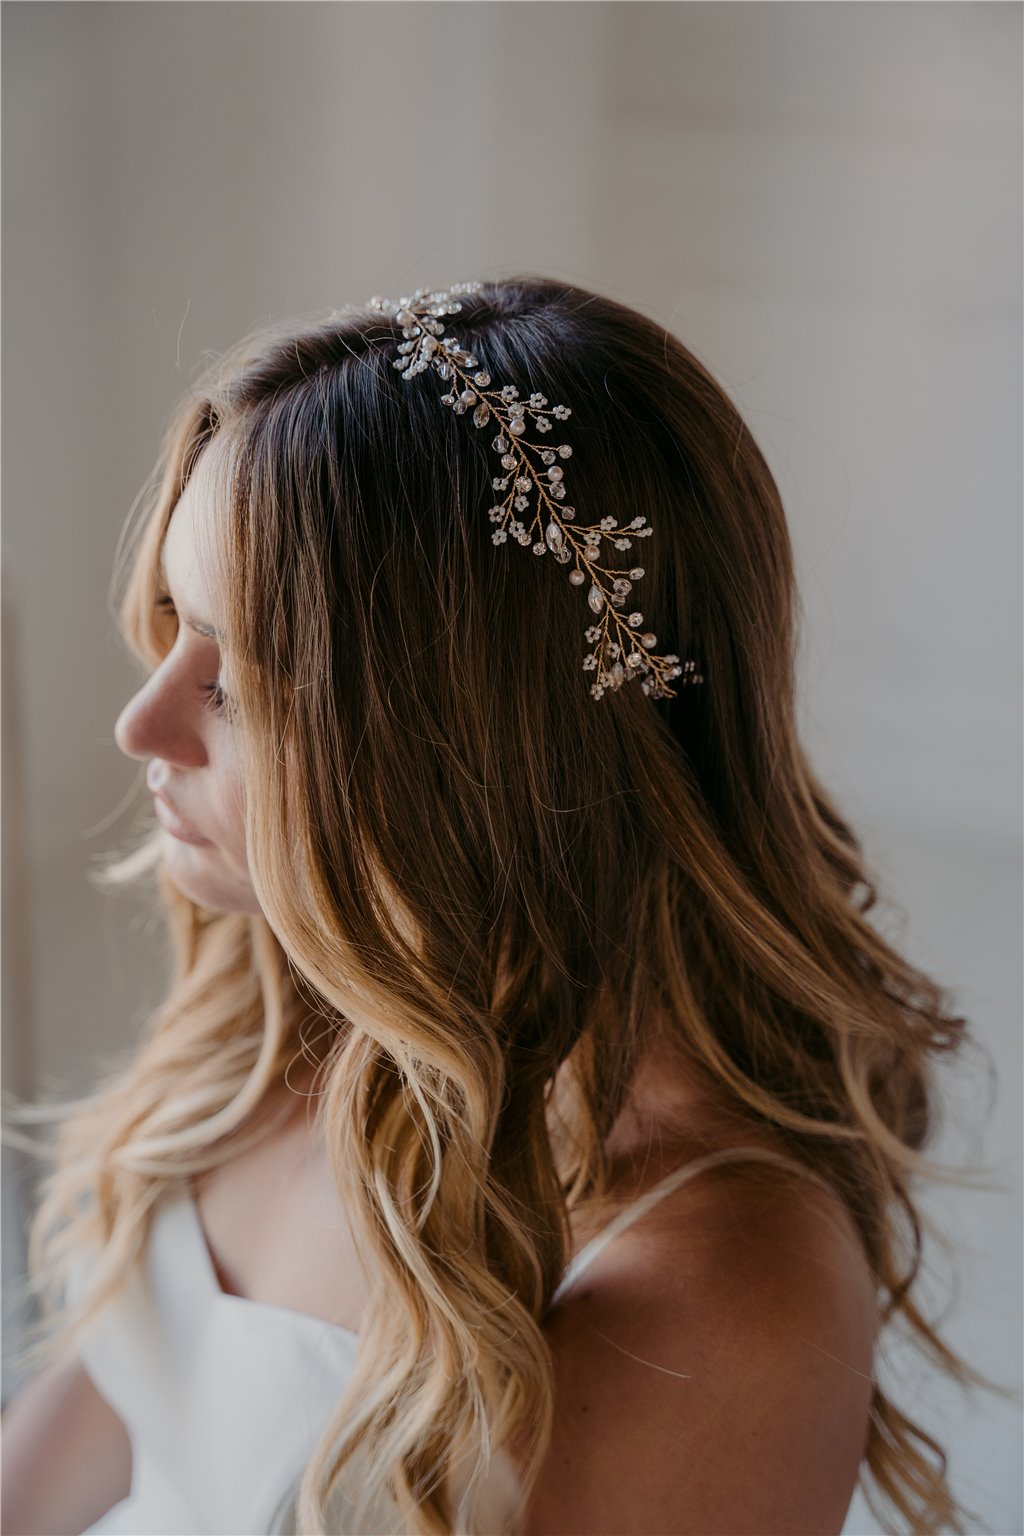 White Magnolia and Leaves Hair Vine Gold Leaves and Headpiece for Bride Accessoires Haaraccessoires Kransen & Tiaras NADIA Bridal Headpiece Gold Hair Vines 